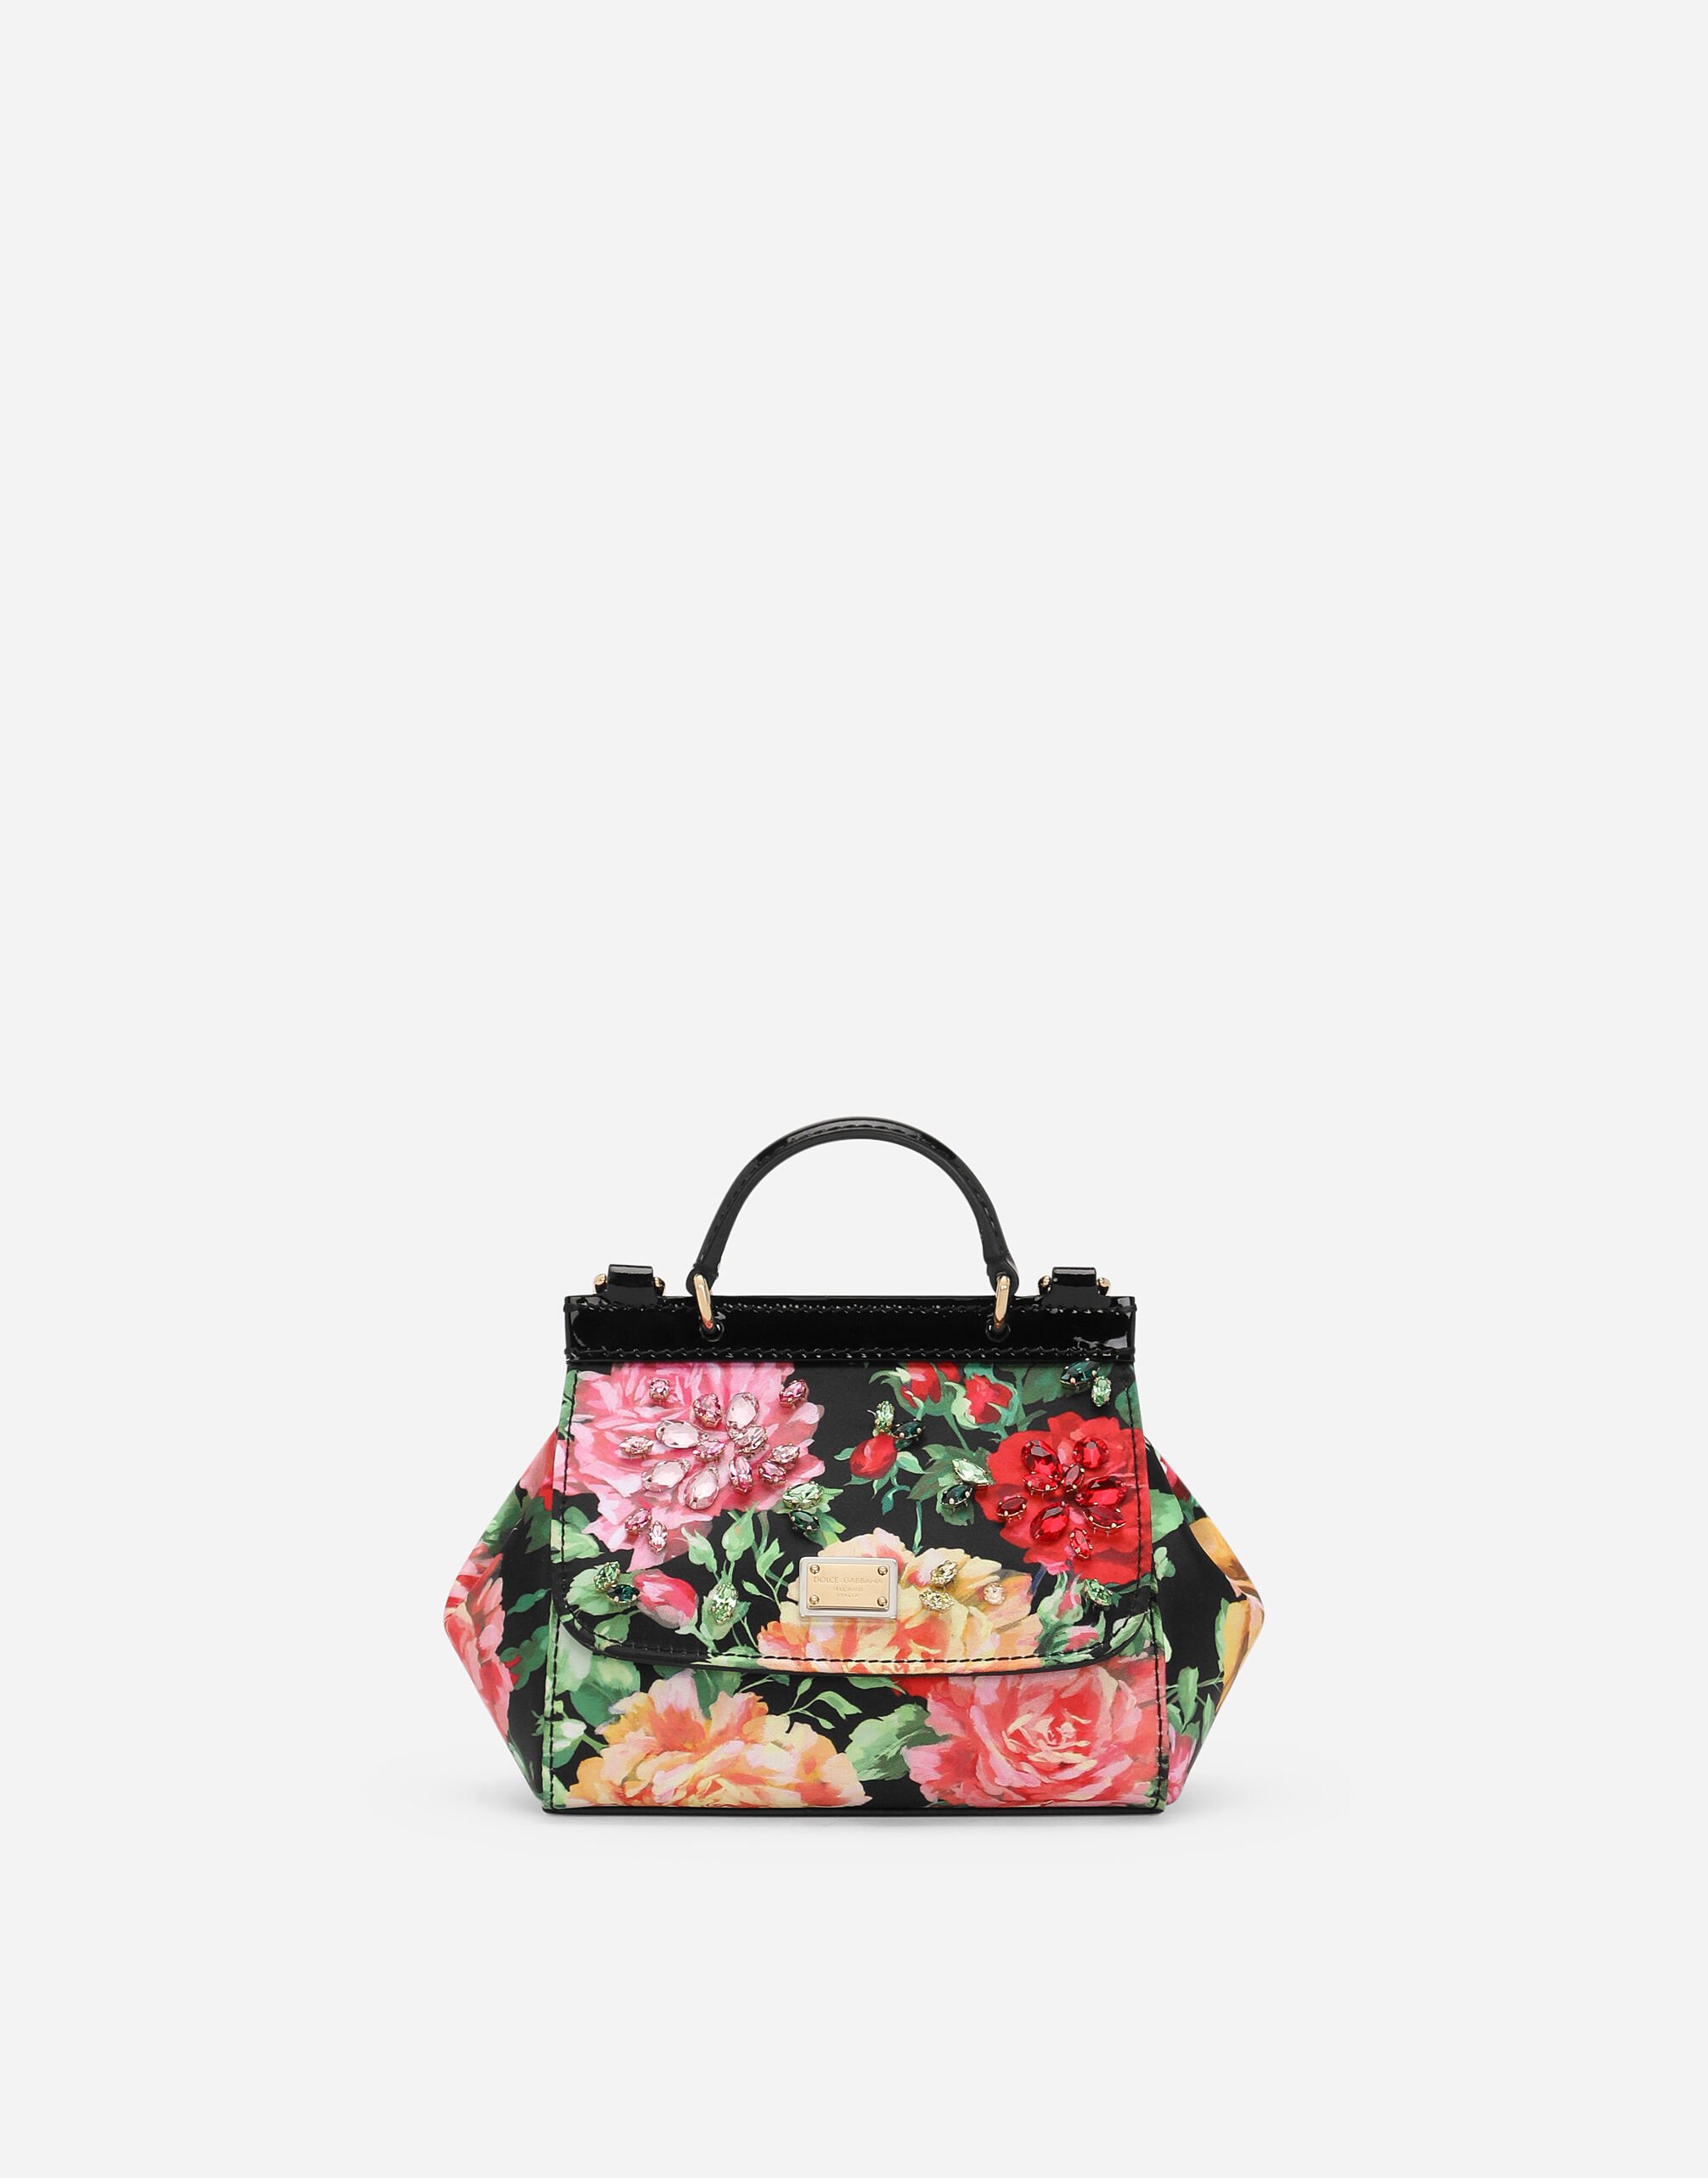 ${brand} Satin Sicily bag with rose print on a black background ${colorDescription} ${masterID}